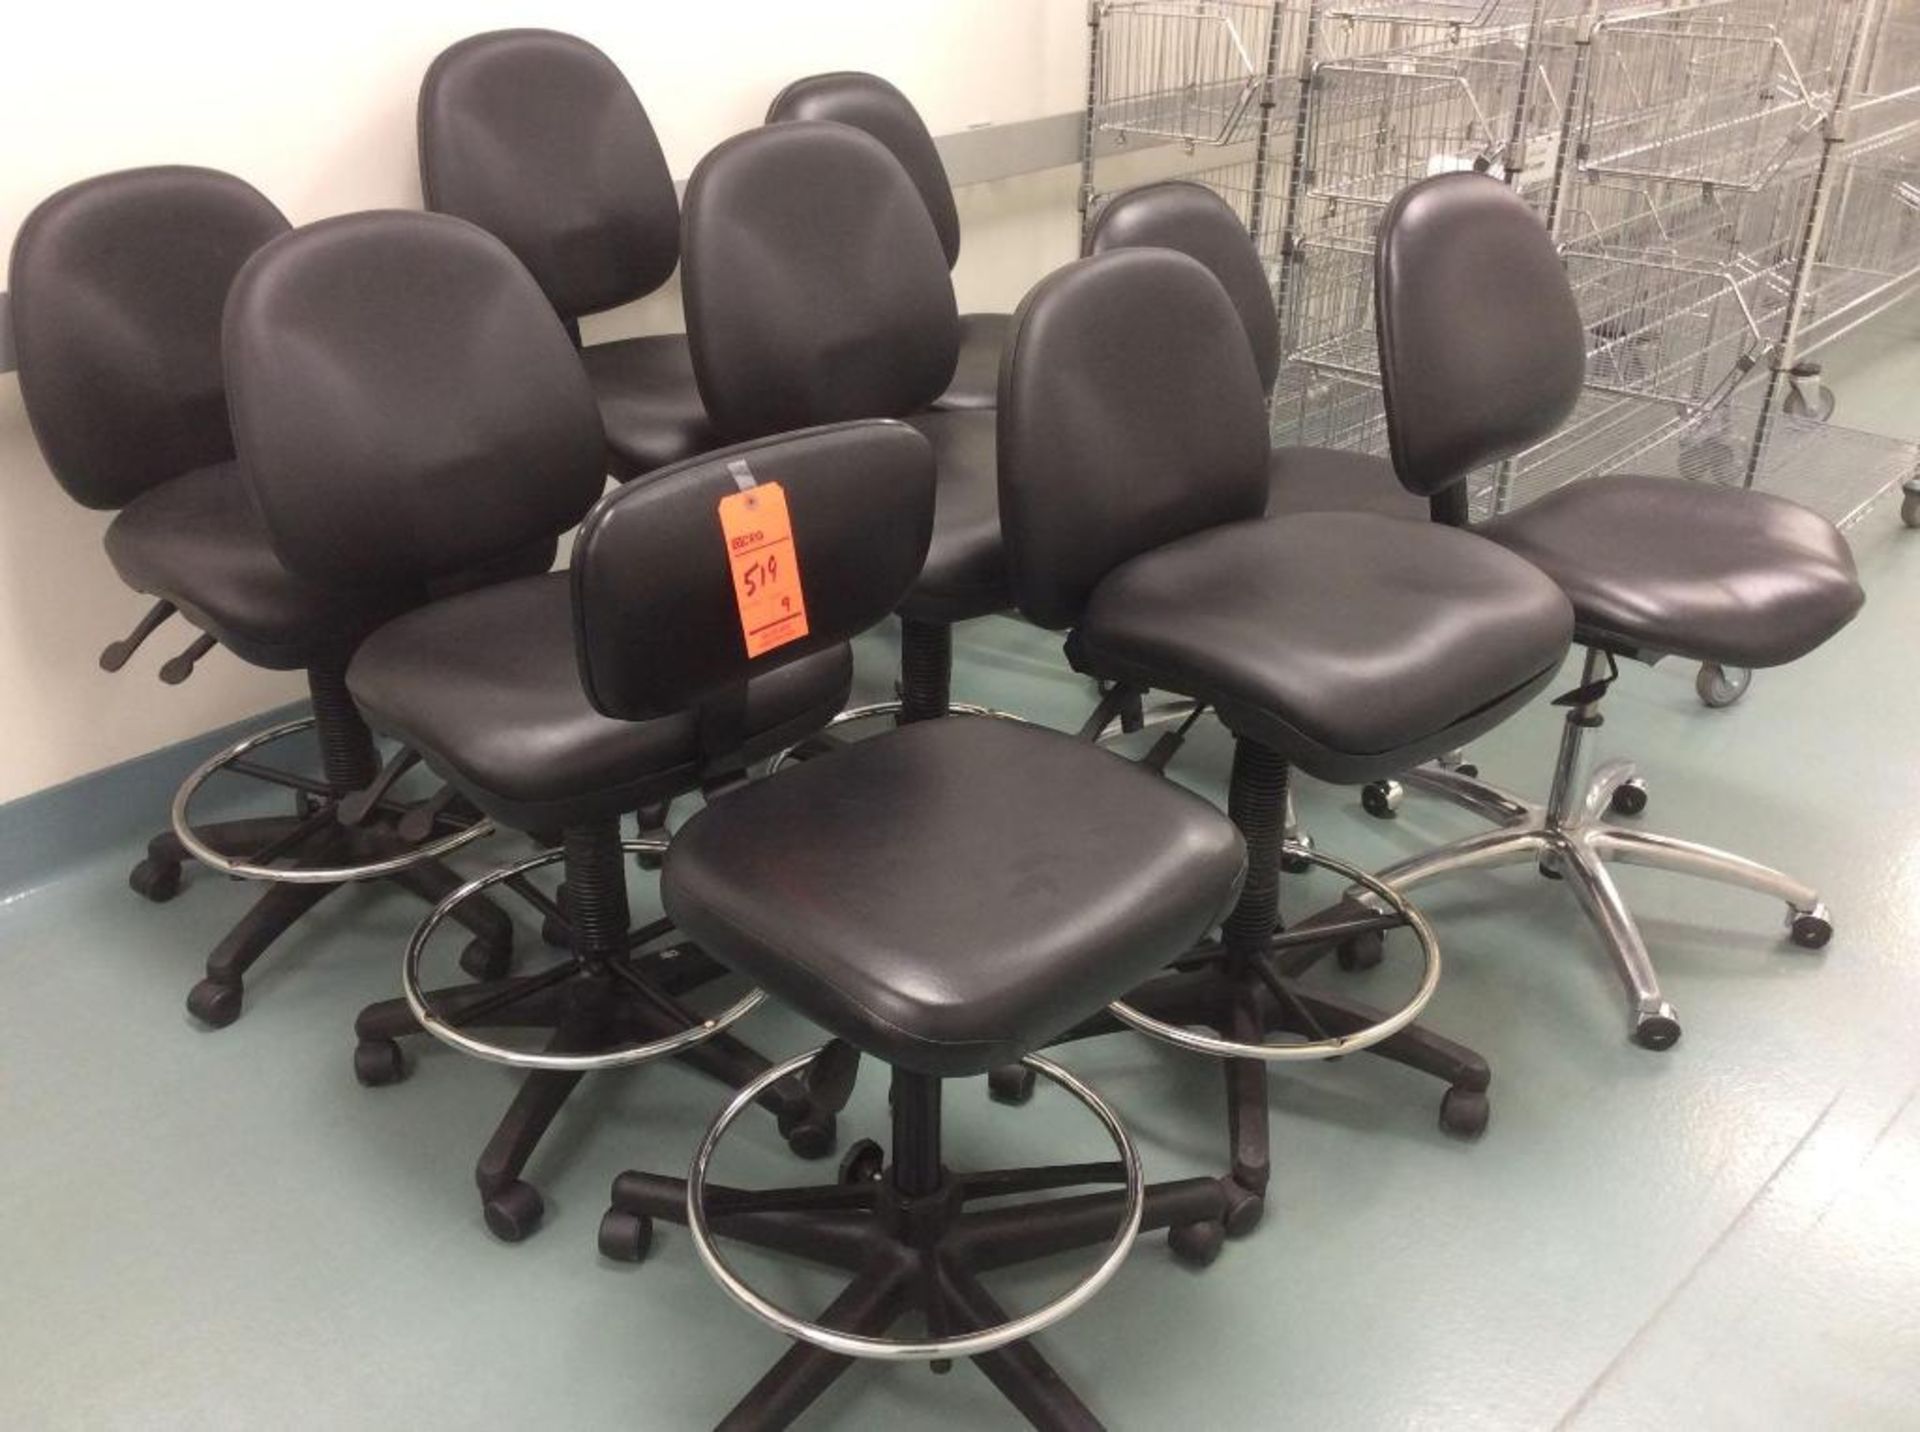 Lot of (9) clean room laboratory chairs